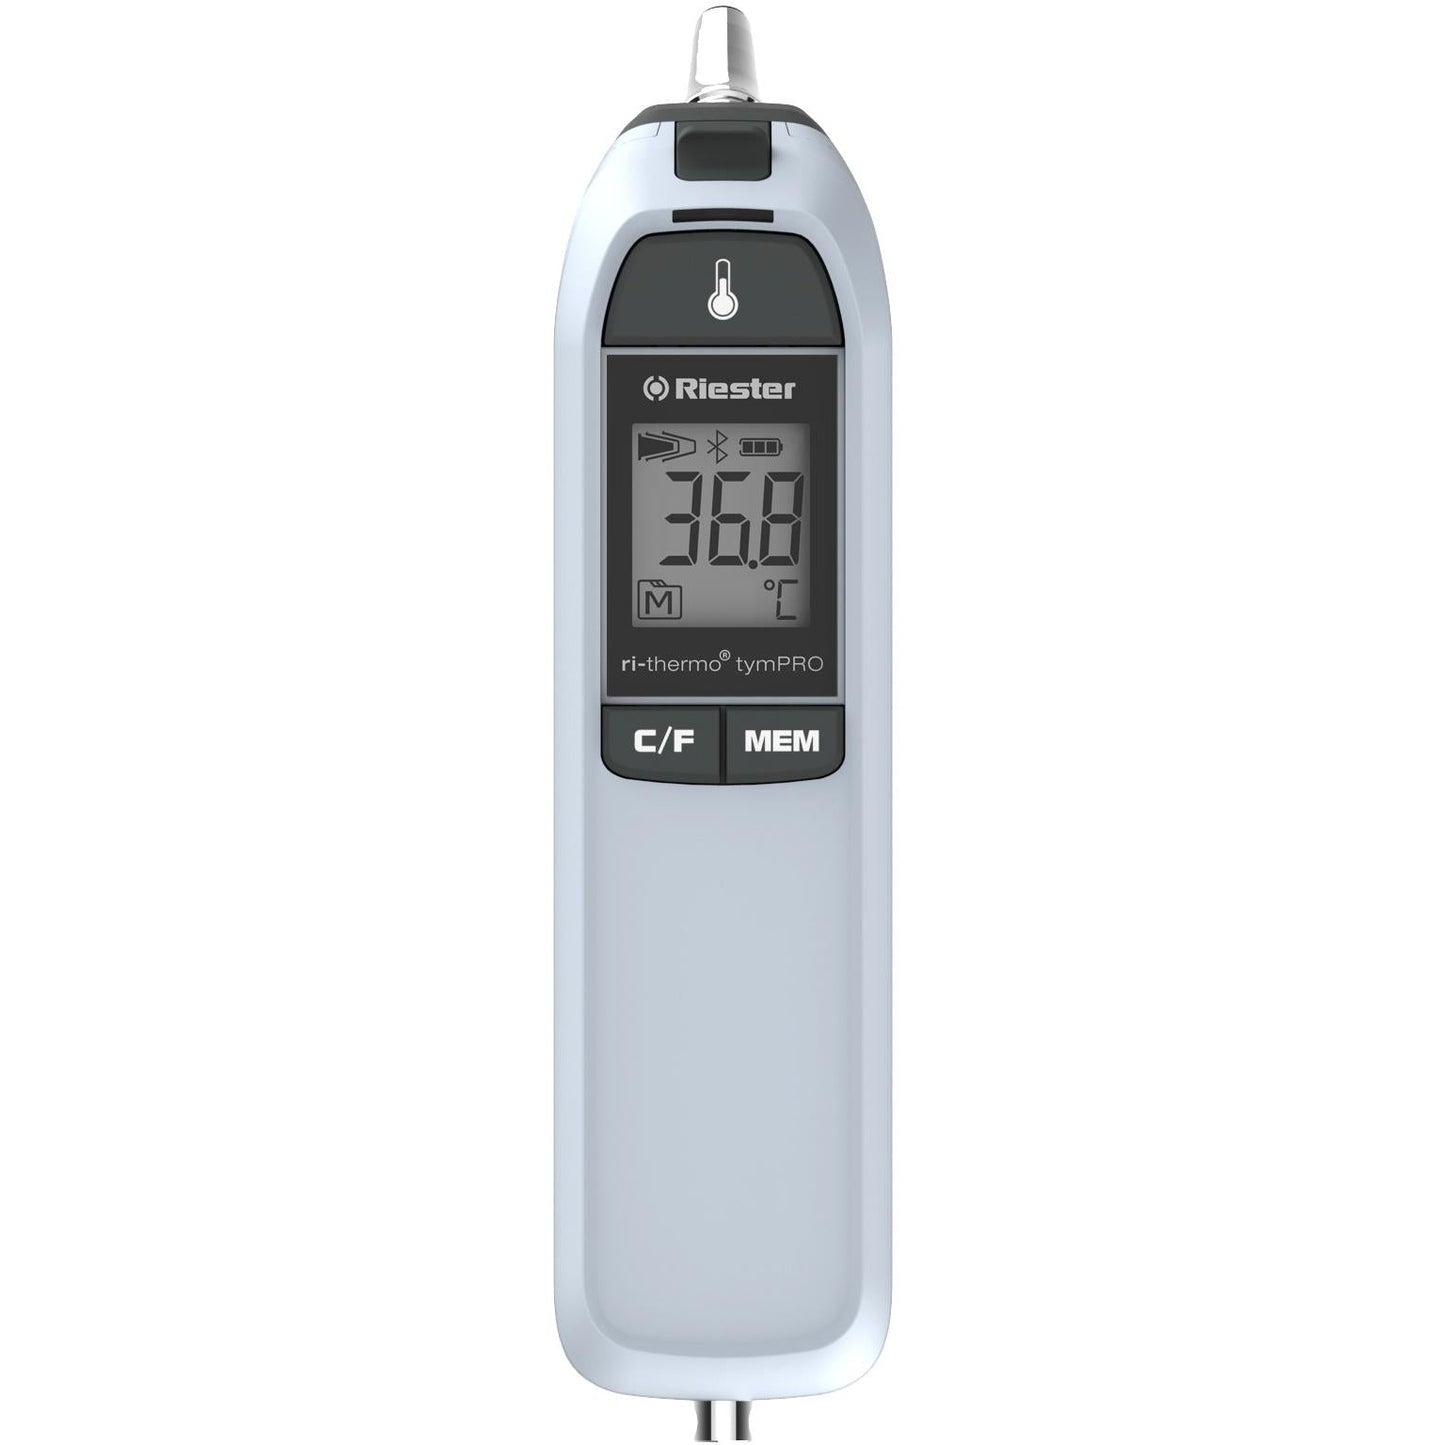 Riester TYMPANIC Thermometer ri-thermo® tymPRO+ Without Bluetooth